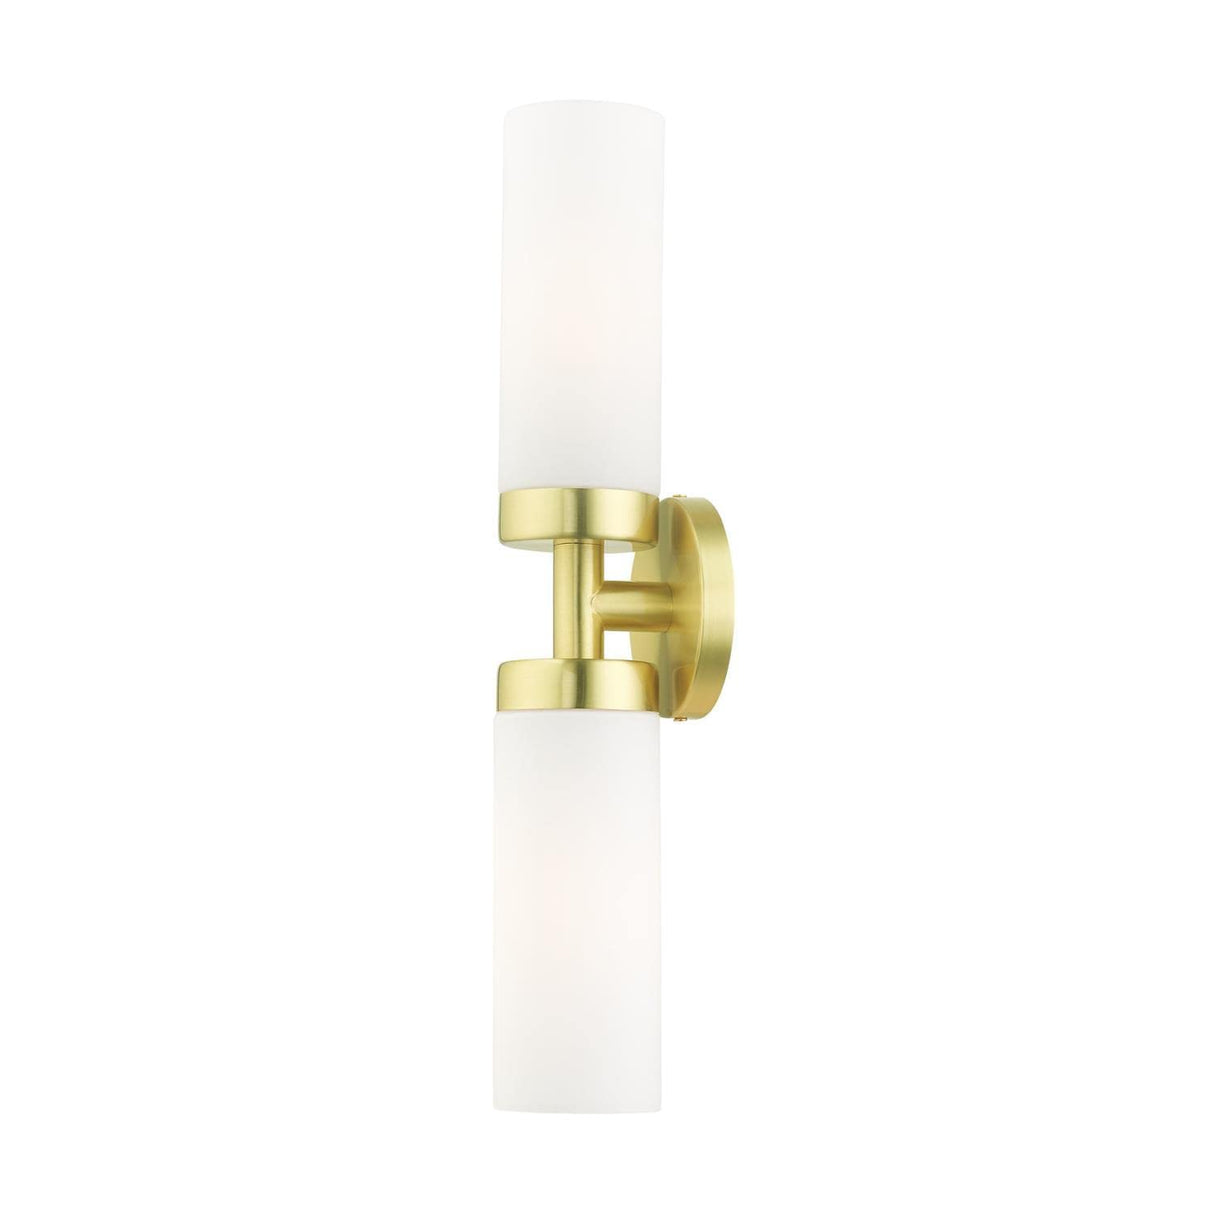 Livex Lighting 15072-12 Aero - 2 Light ADA Bath Vanity in Aero Style - 19.25 Inches Wide by 4.25 Inches high, Satin Brass Finish with Satin Opal White Glass